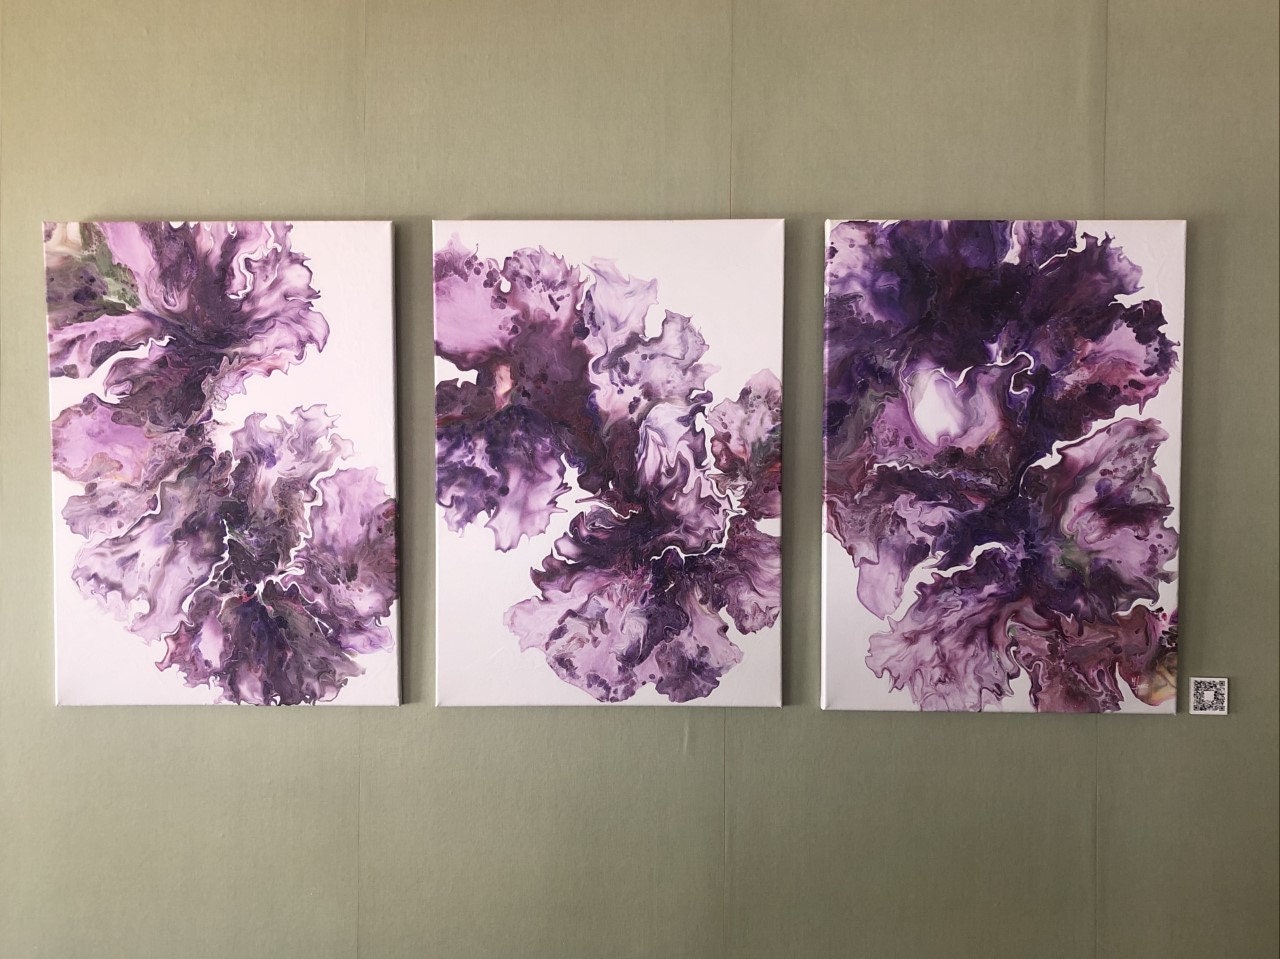 The Big Bang 8 Triptych Unique Acrylic Pour on 3 X 12 X 4 Small